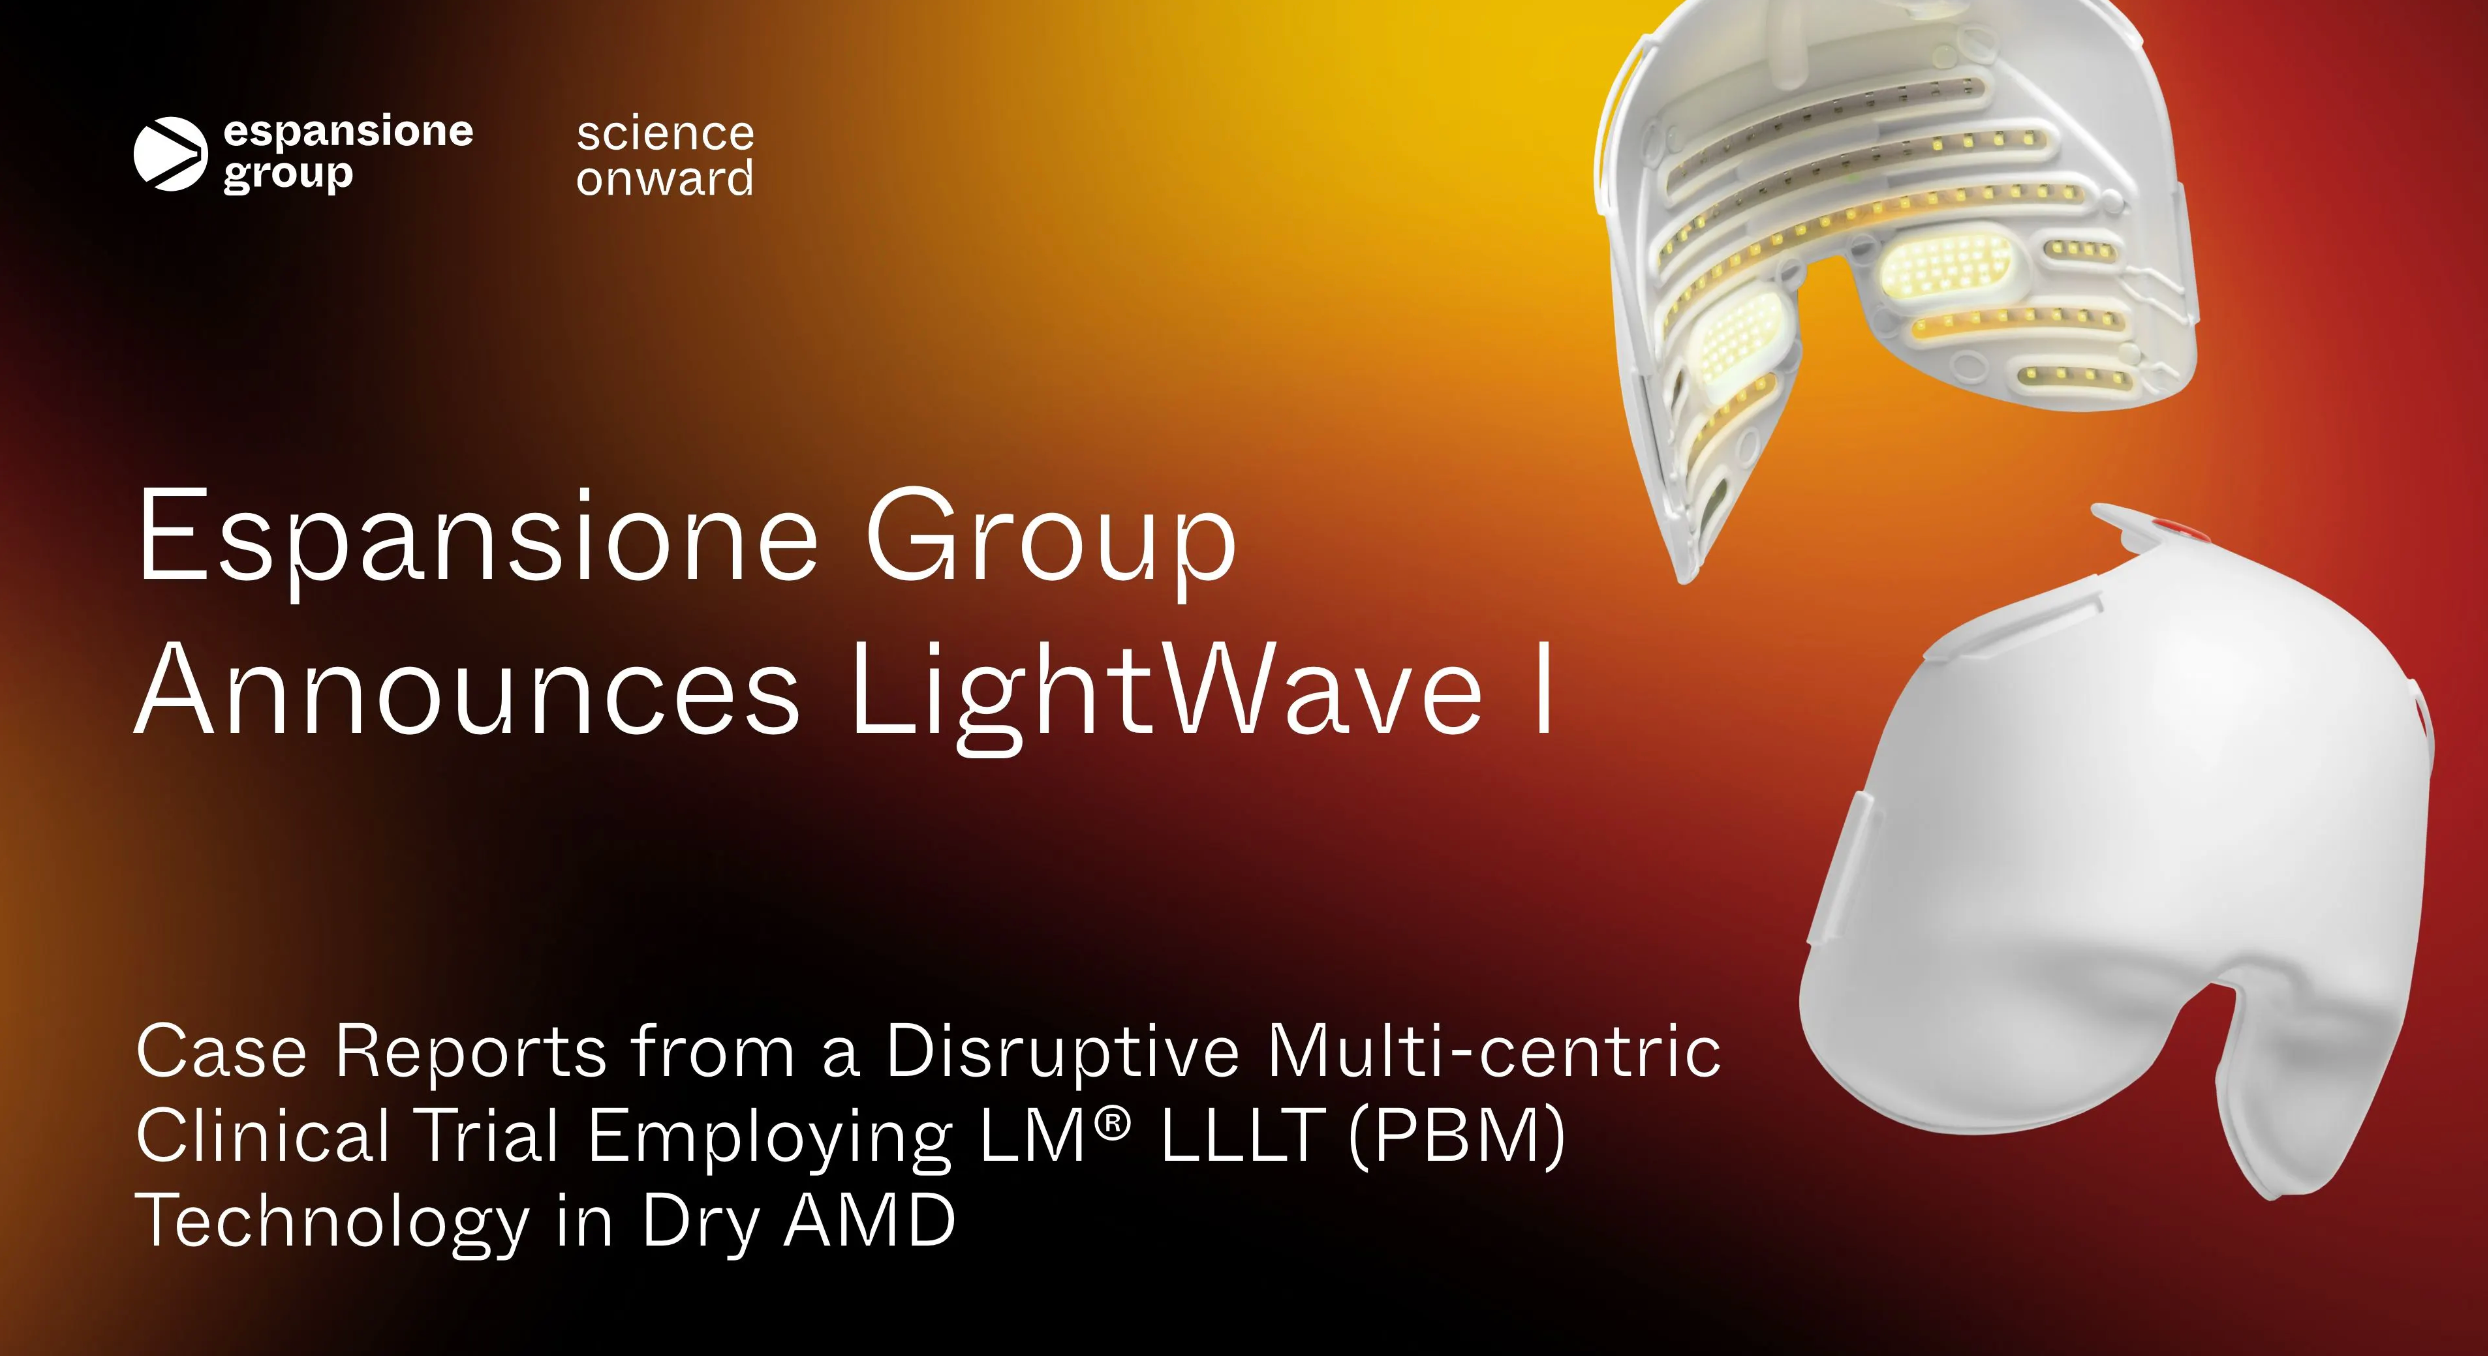 The image depicts LM LLLT technology from Espansione Group. Image courtesy of Espansione Group.